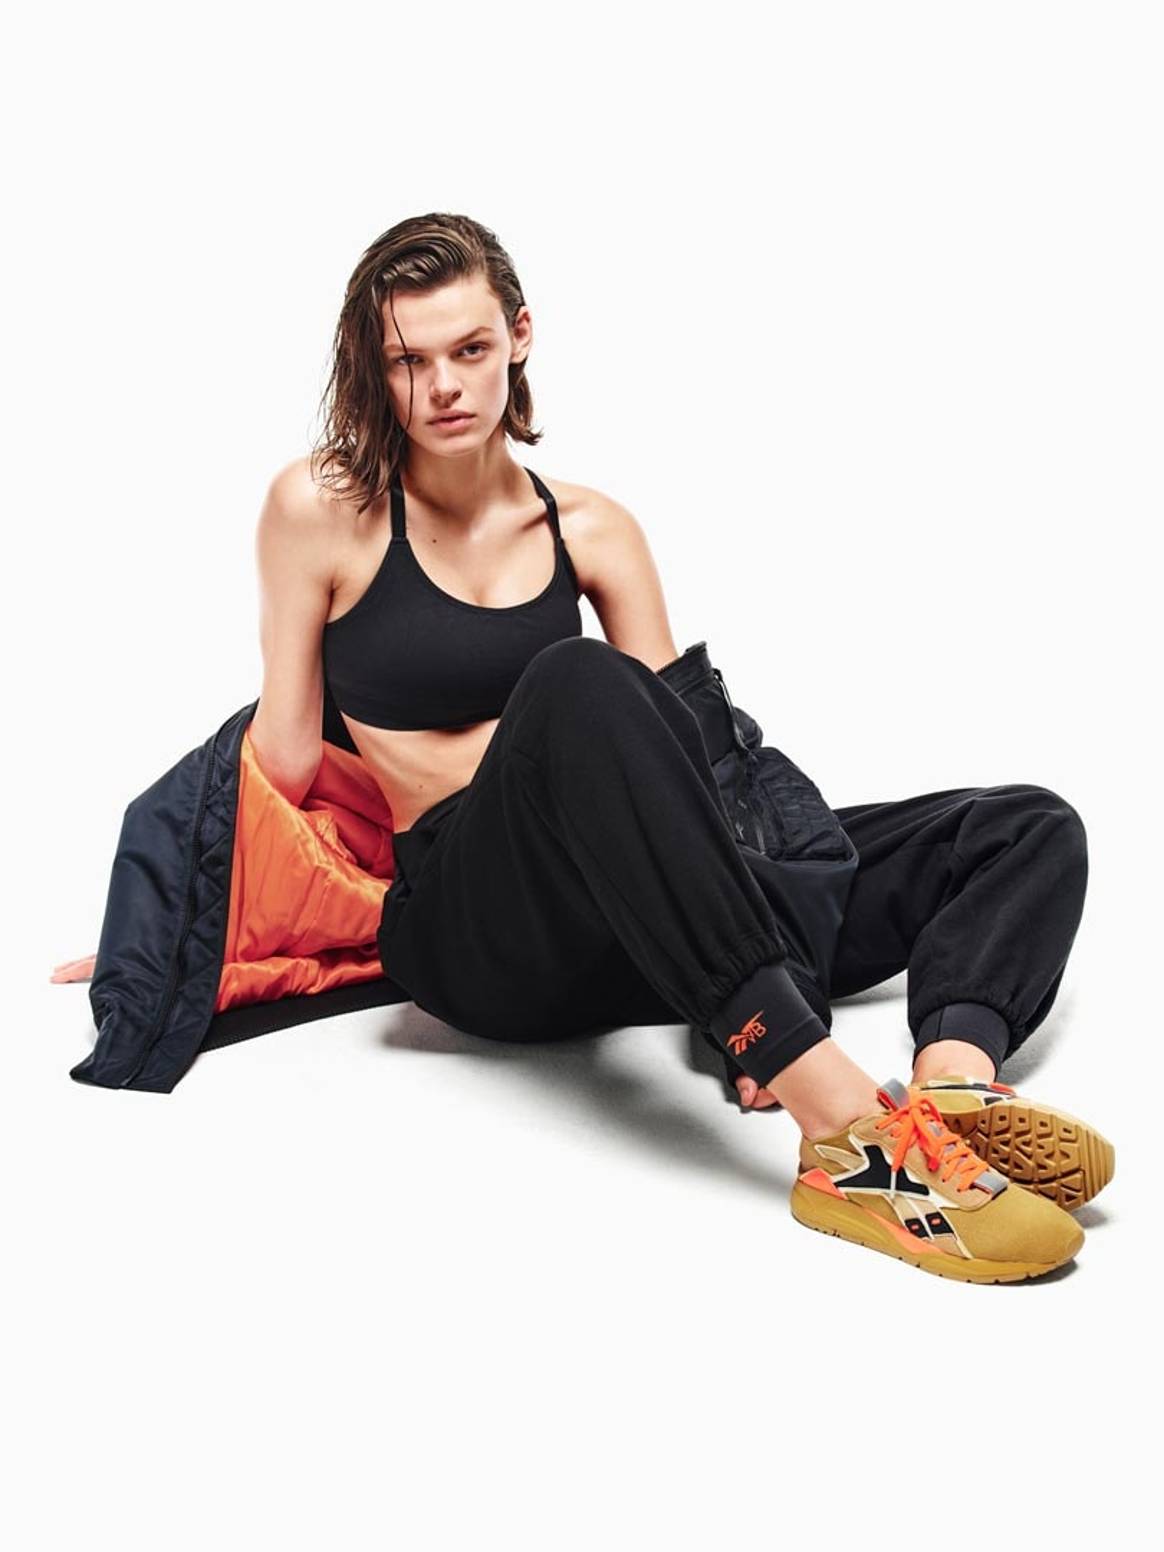 Reebok launches debut Victoria Beckham collection